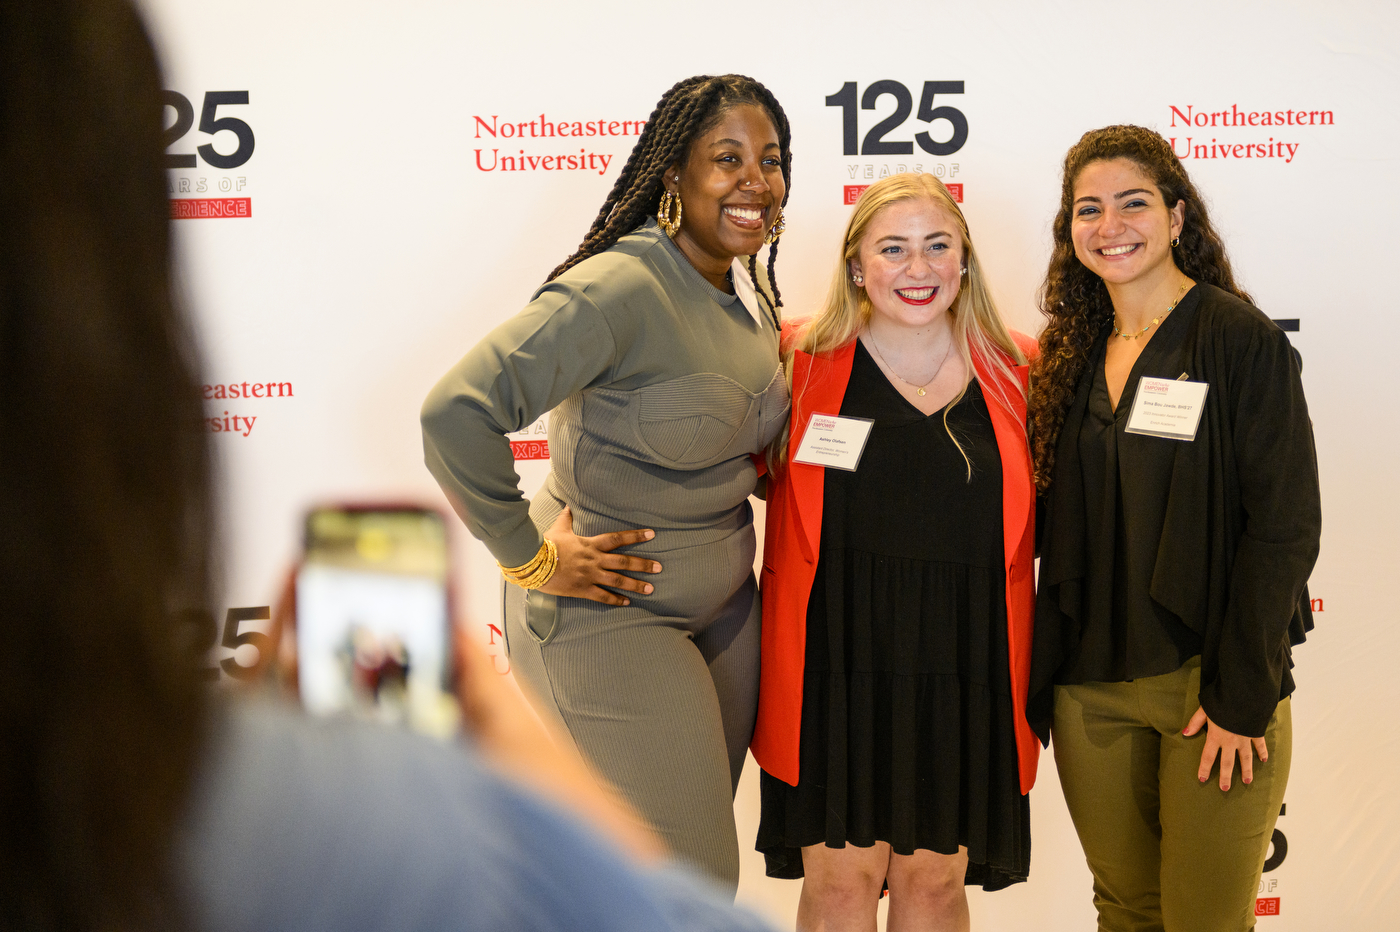 Participants pose for photos in front of a backdrop that says 125 Years of Experience, Northeastern University